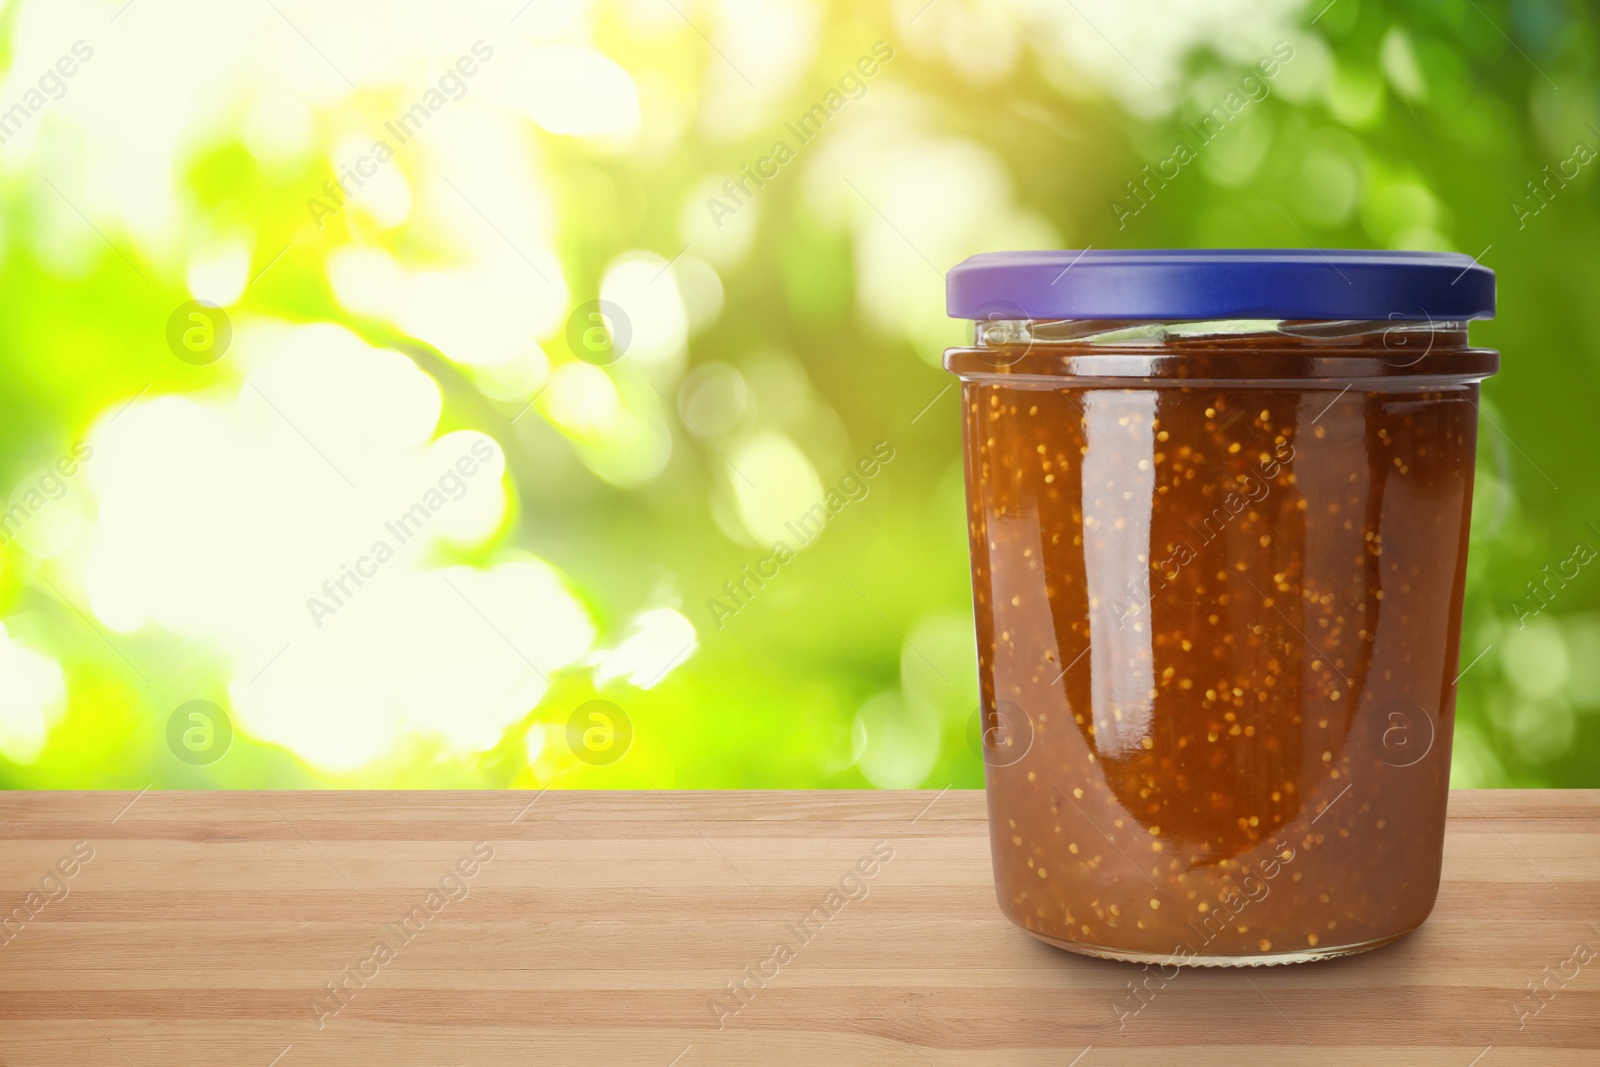 Image of Jar of fig jam on wooden table against blurred background, space for text